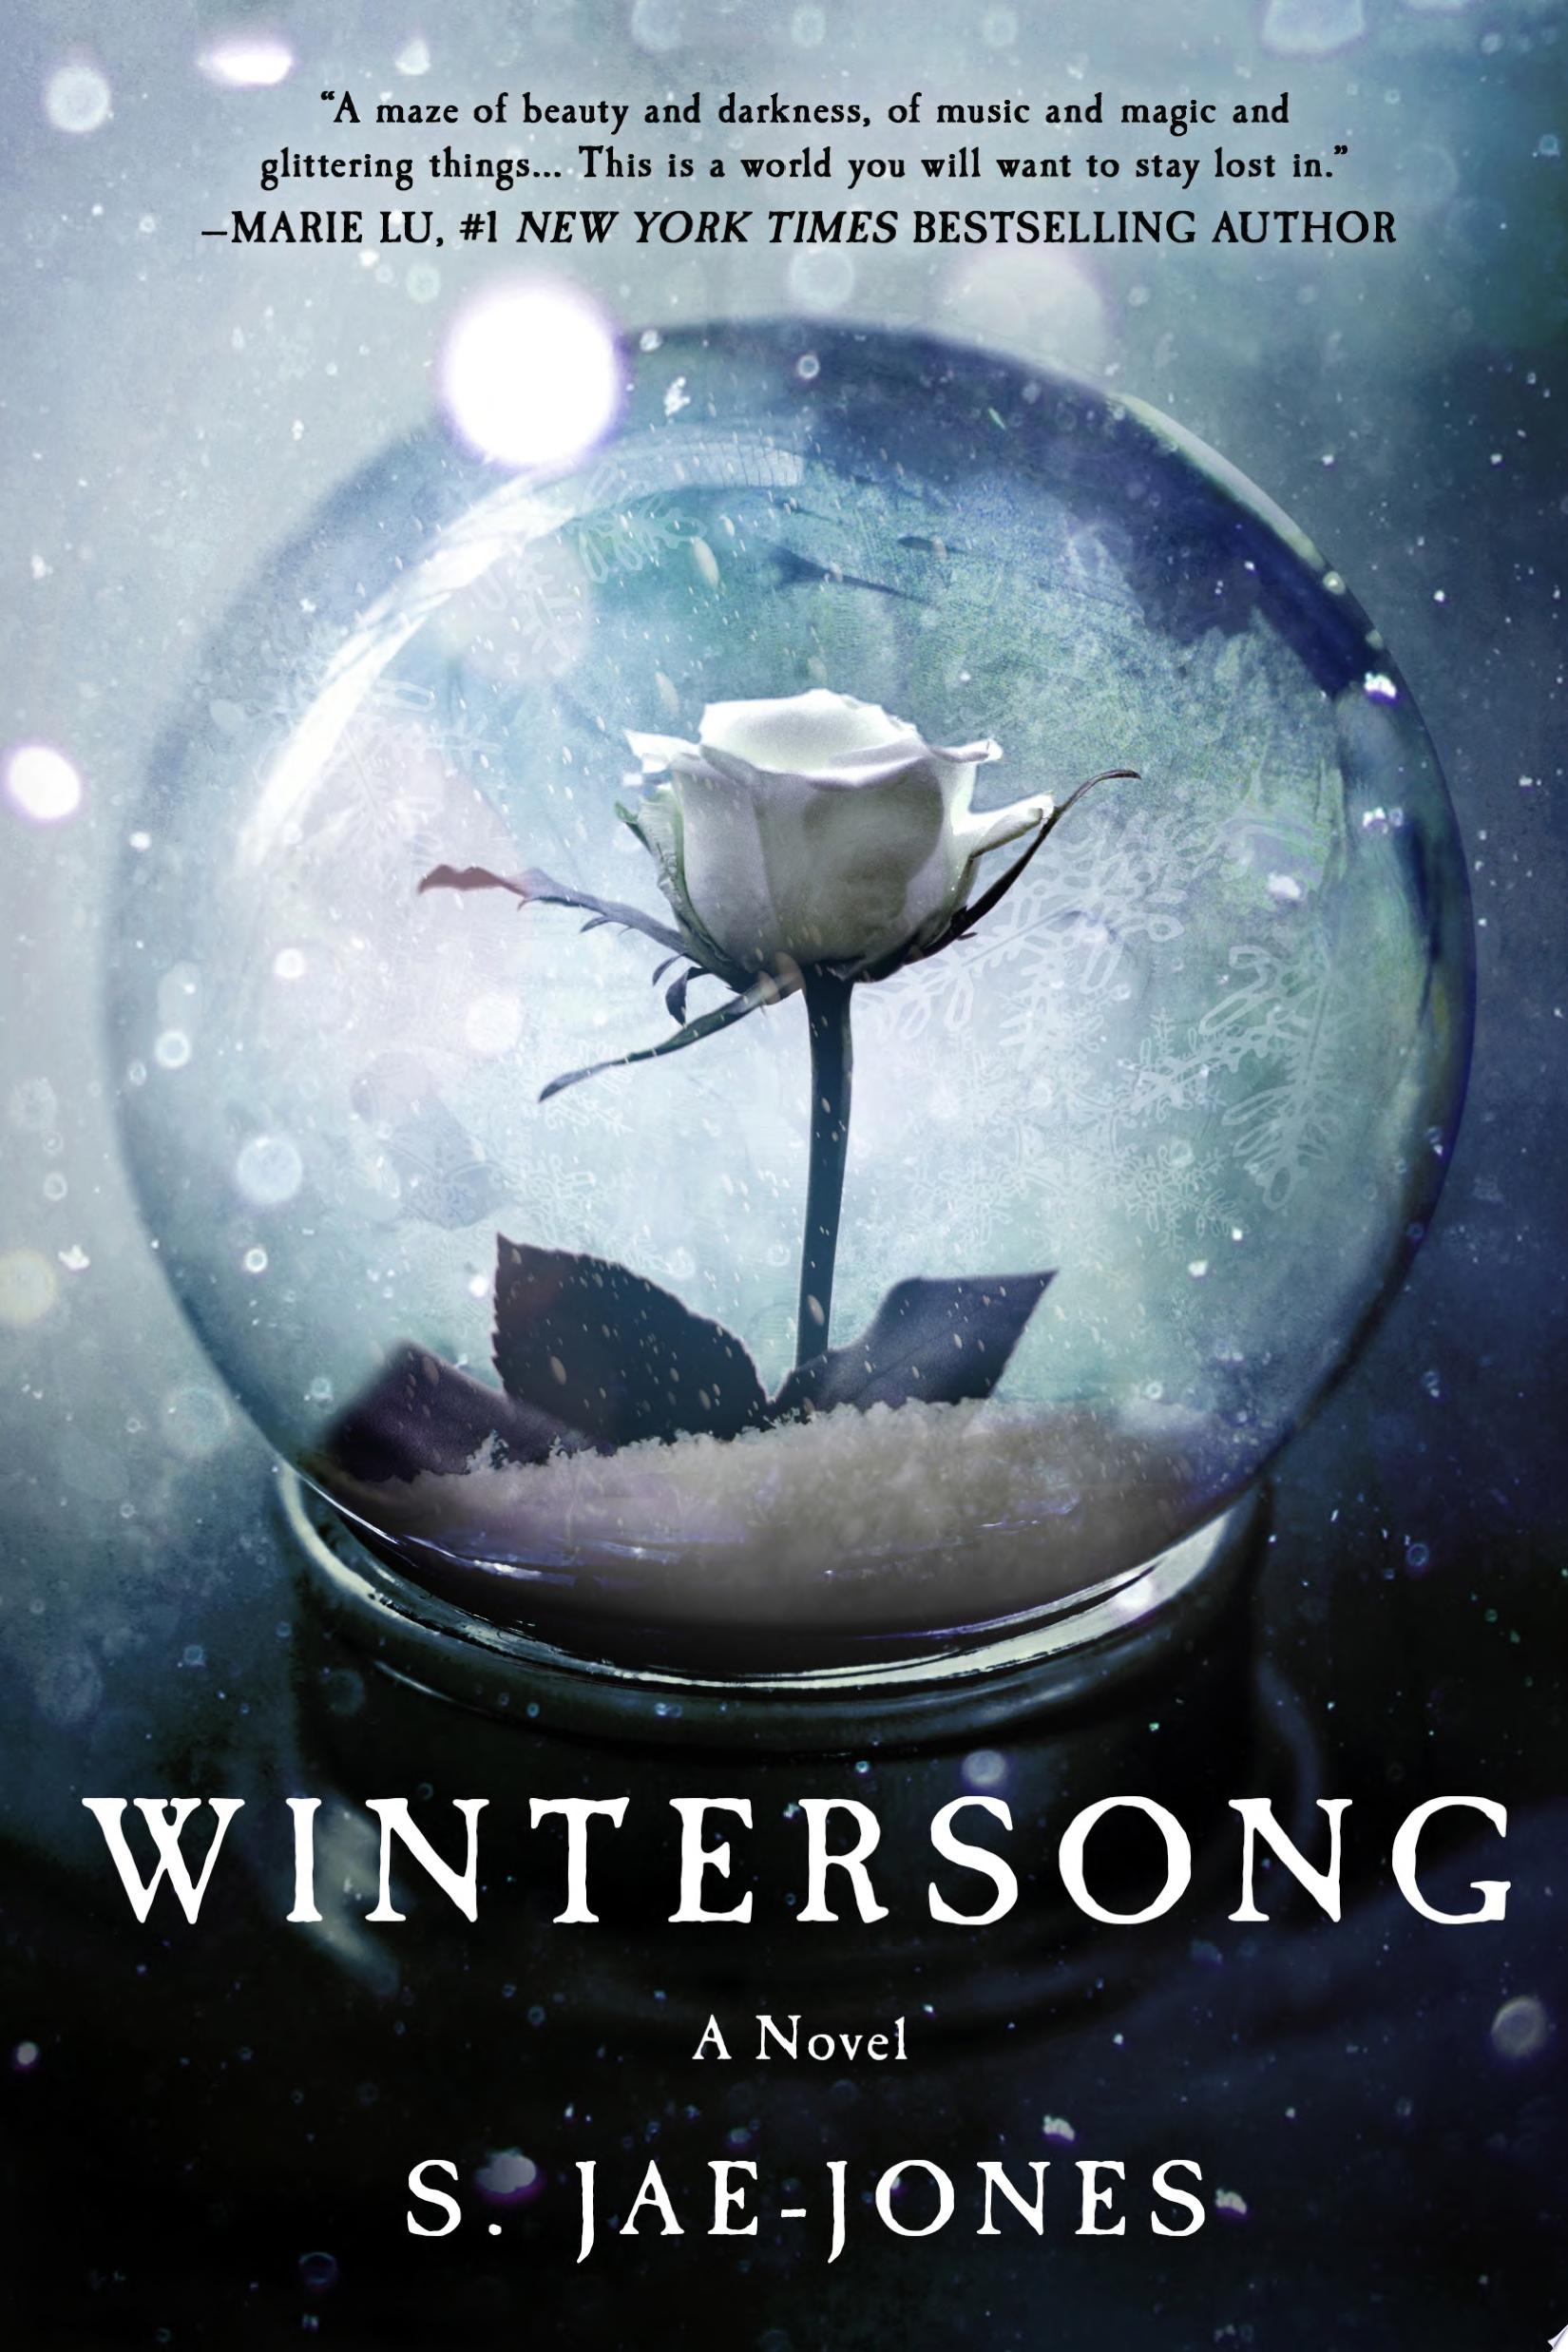 Image for "Wintersong"